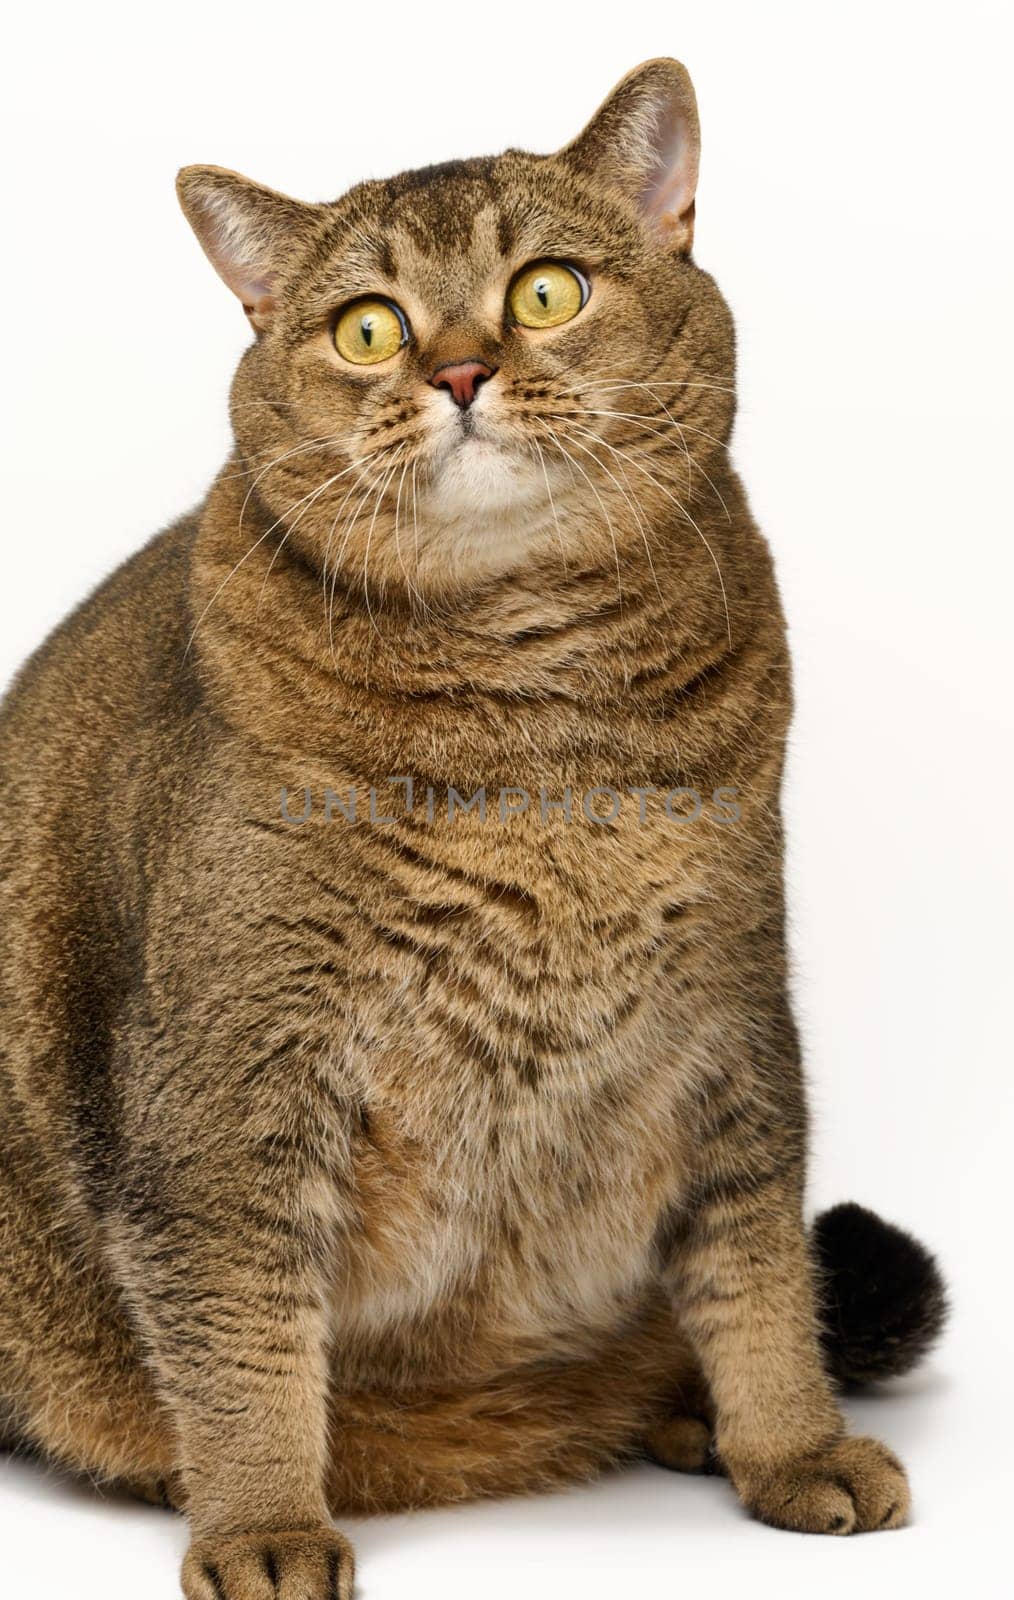 Adult gray cat sitting on a white background, funny face